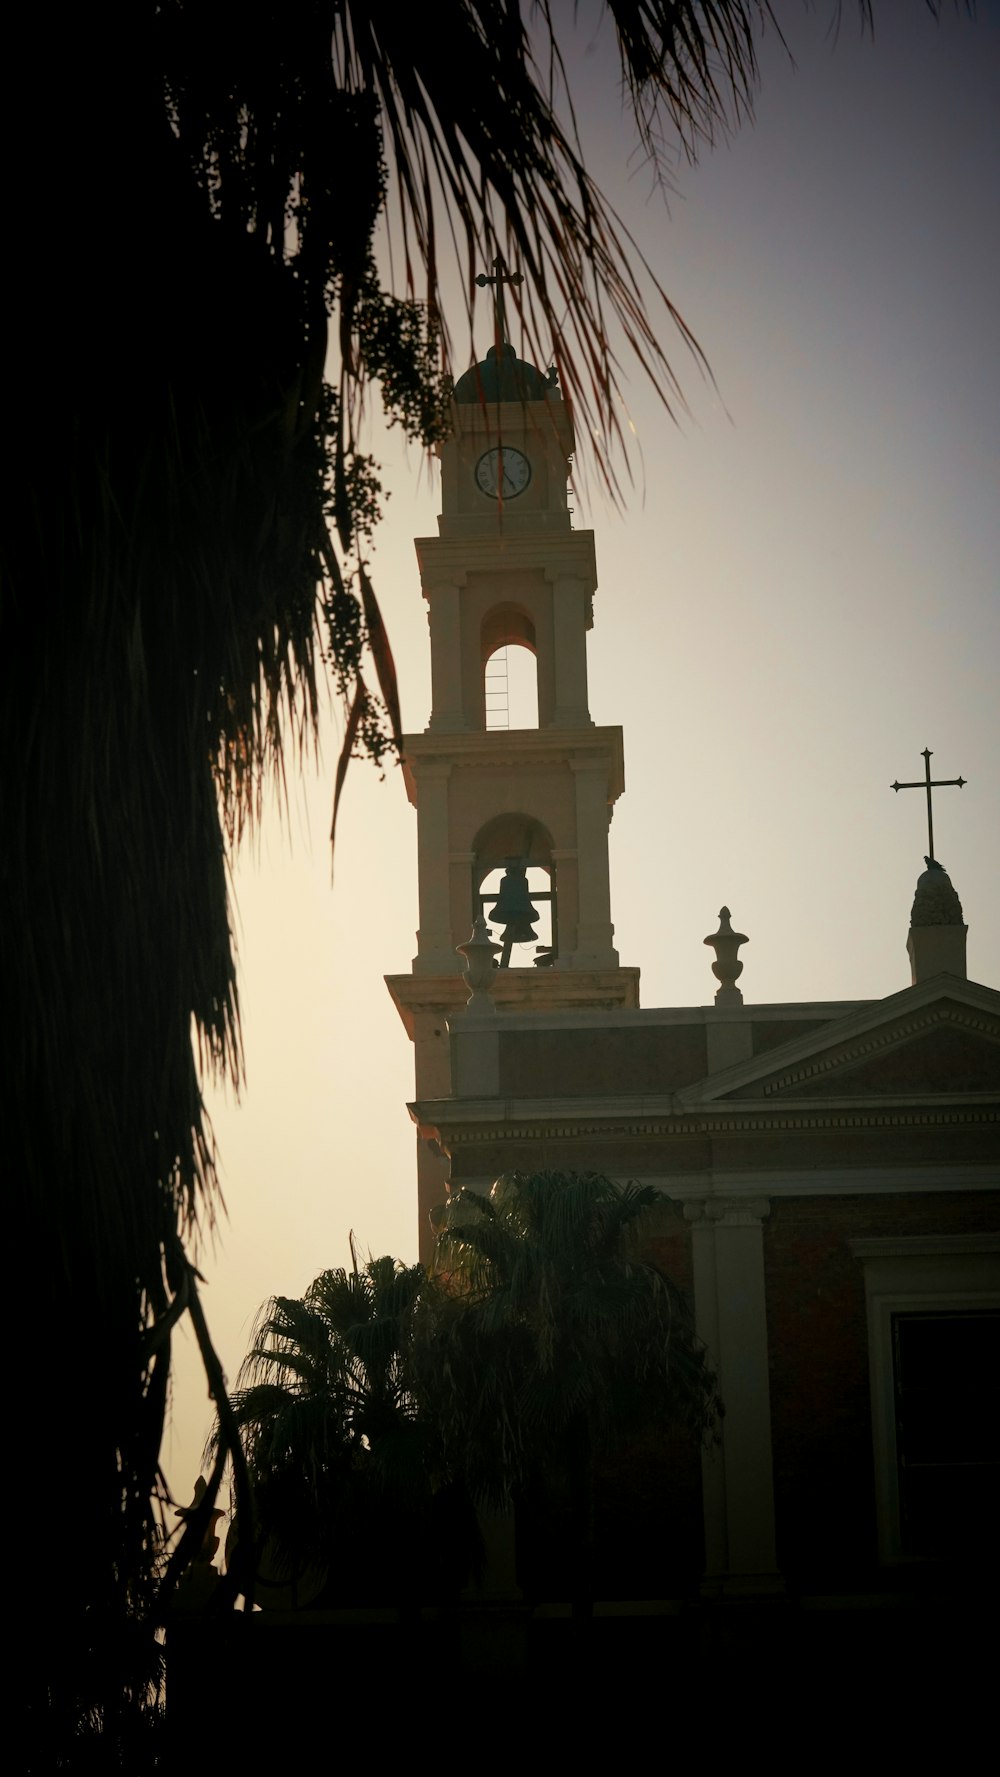 a church with a bell tower and a cross on top